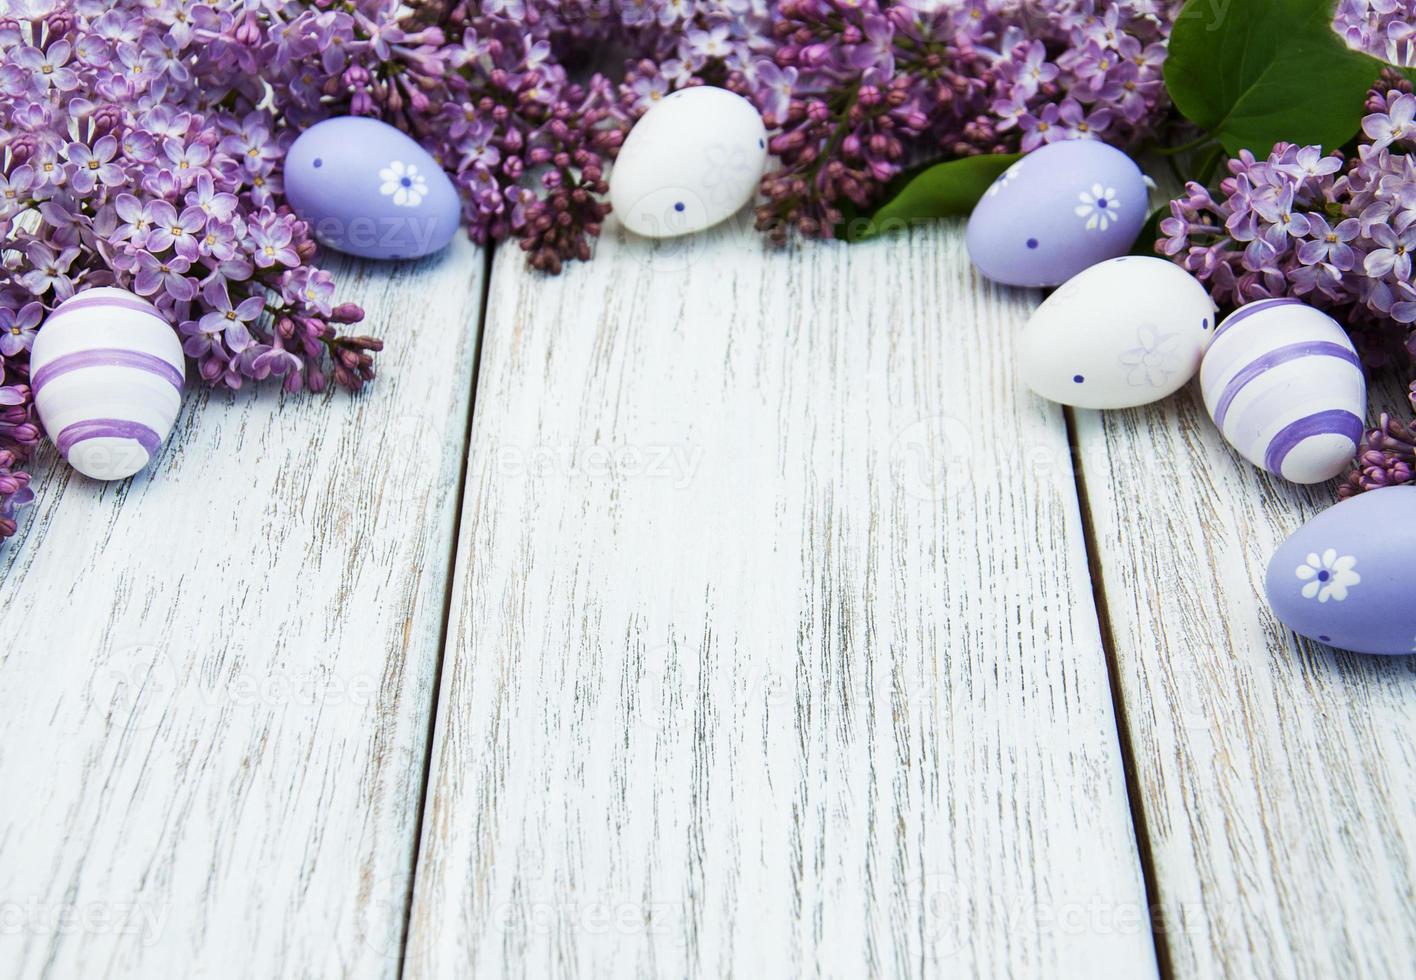 easter eggs and fresh lilac flowers photo